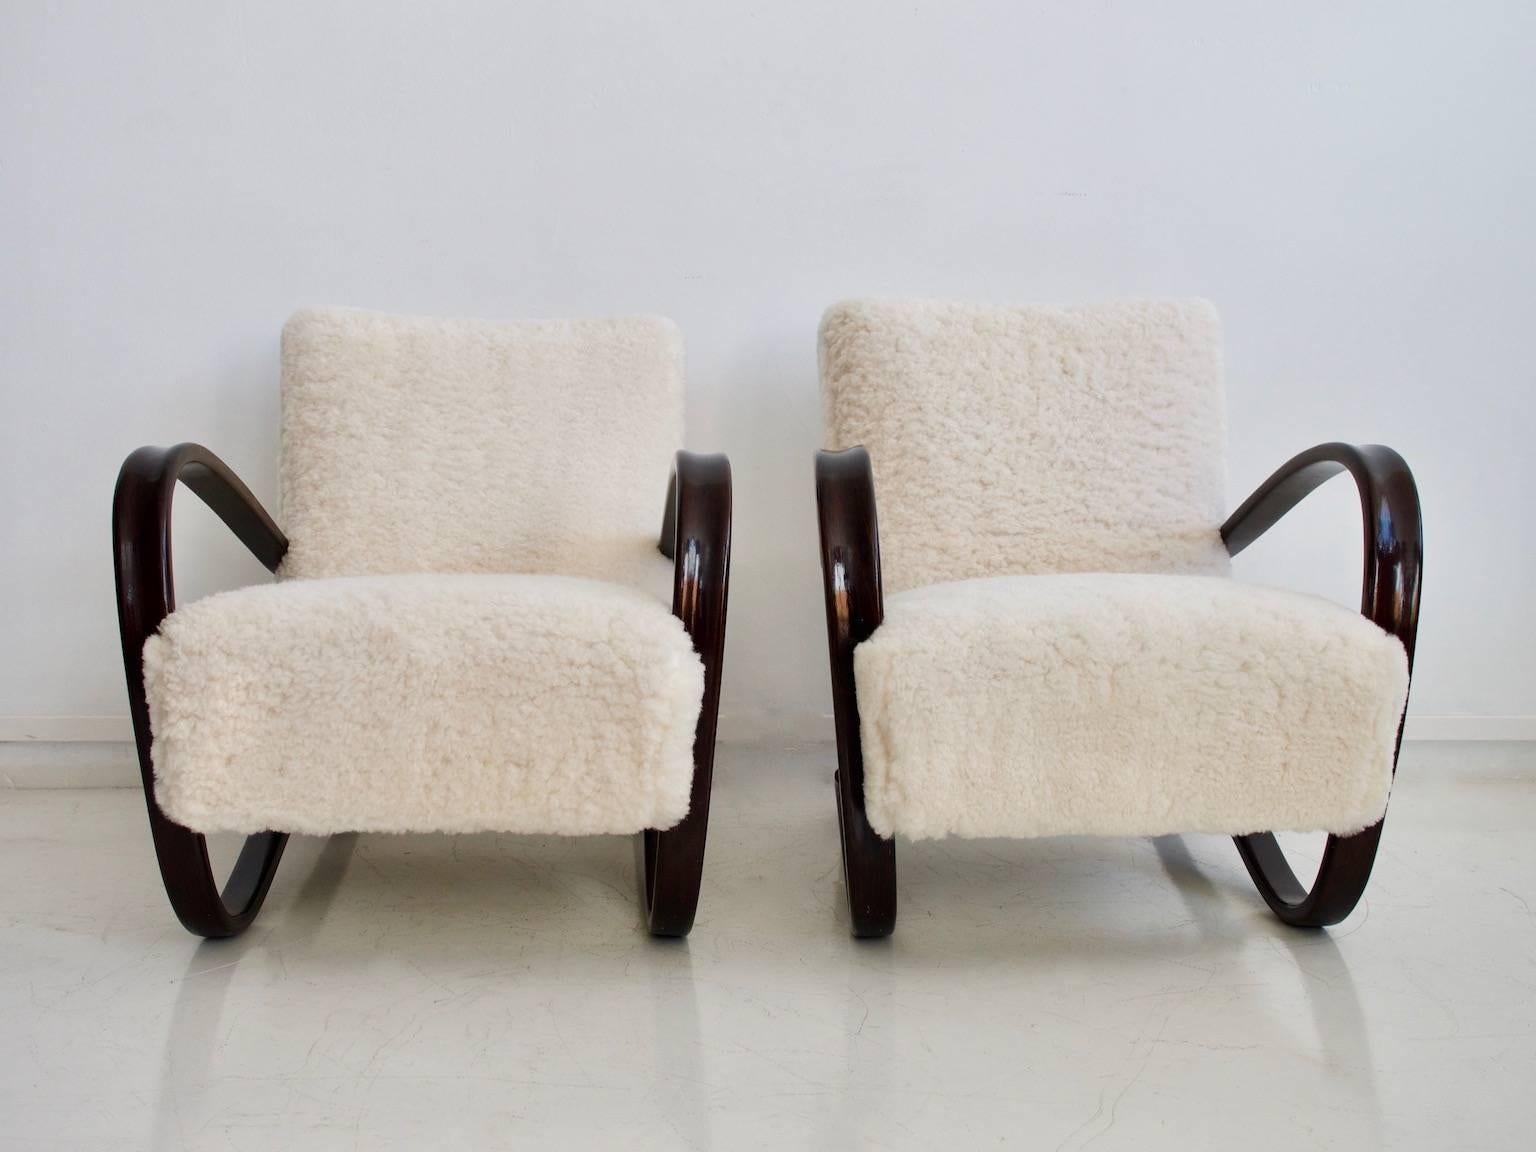 Pair of armchairs, model Kreslo H269, was designed by Jindrich Halabala (1903-1978), chief designer of the furniture factory Spojené UP Závody in Brno, circa 1930. These comfortable lounge chairs feature a varnished wood frame, bent into a U-shape,